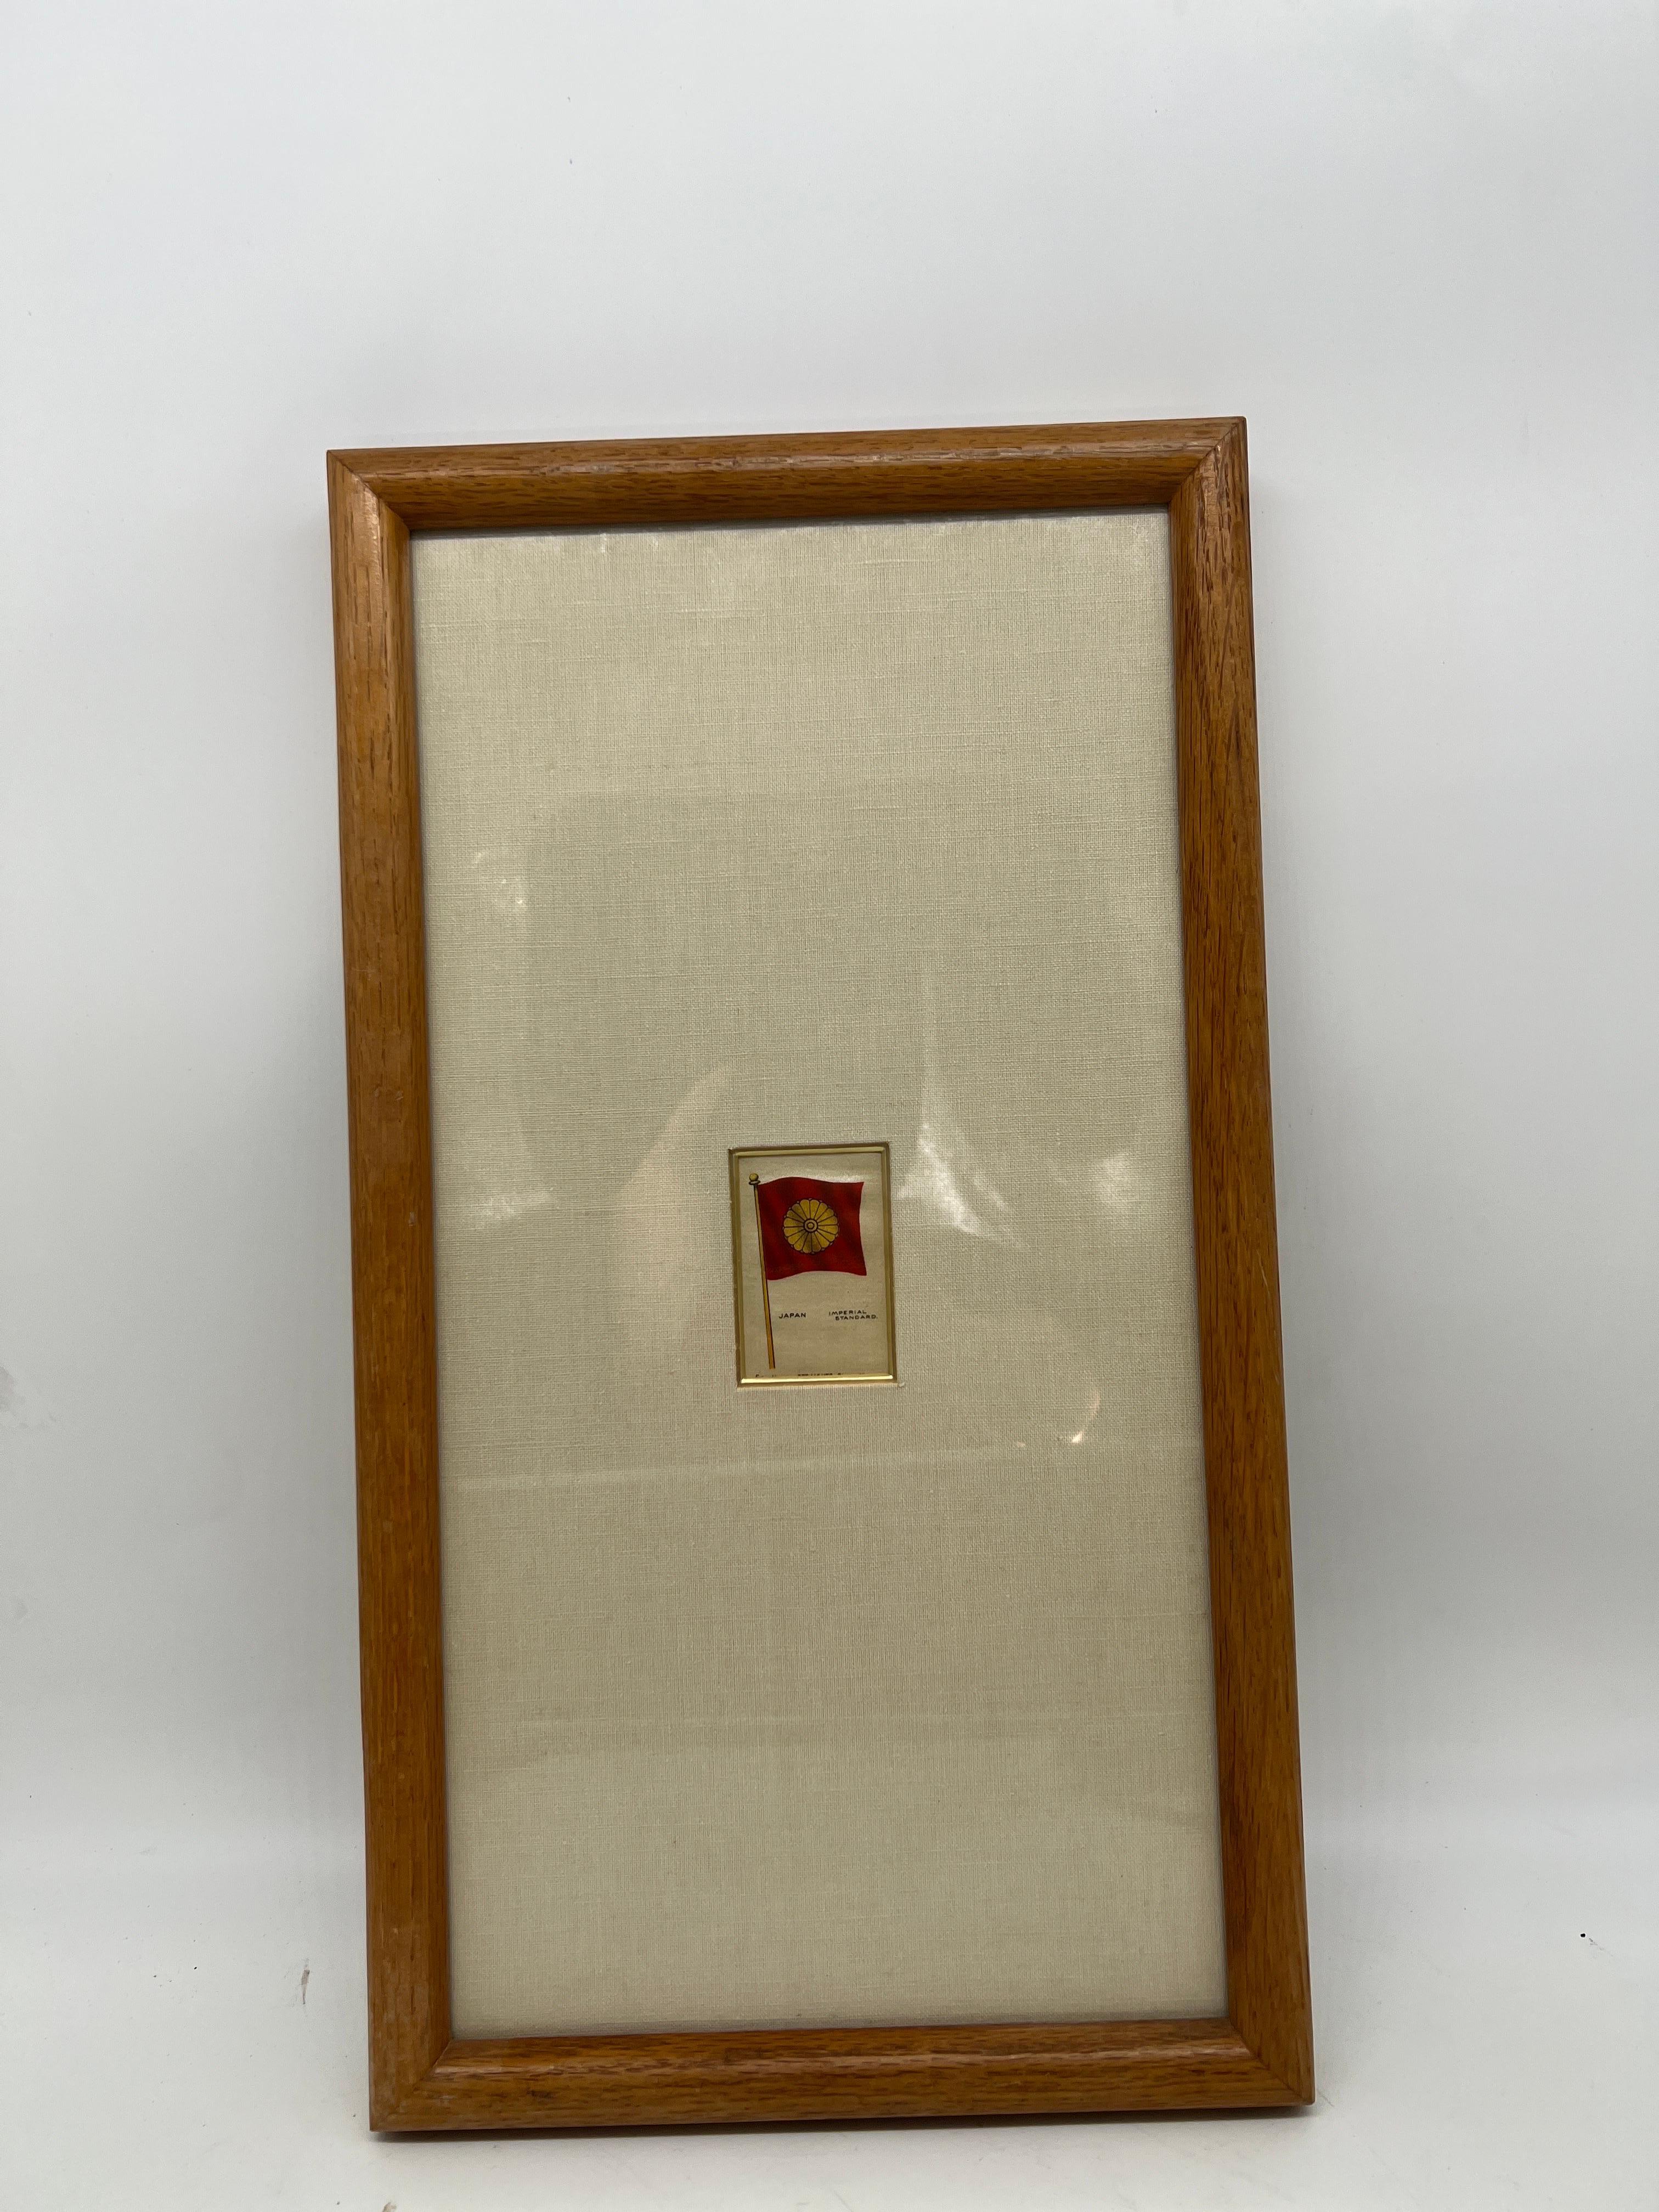 Sovereign Cigarettes, circa 1910.

A framed antique silk cigarette card circa 1910 featuring one of the 126 piece series of country flags. This one showcases the Imperial Standard Japanese flag. In a fine quality frame and matte.